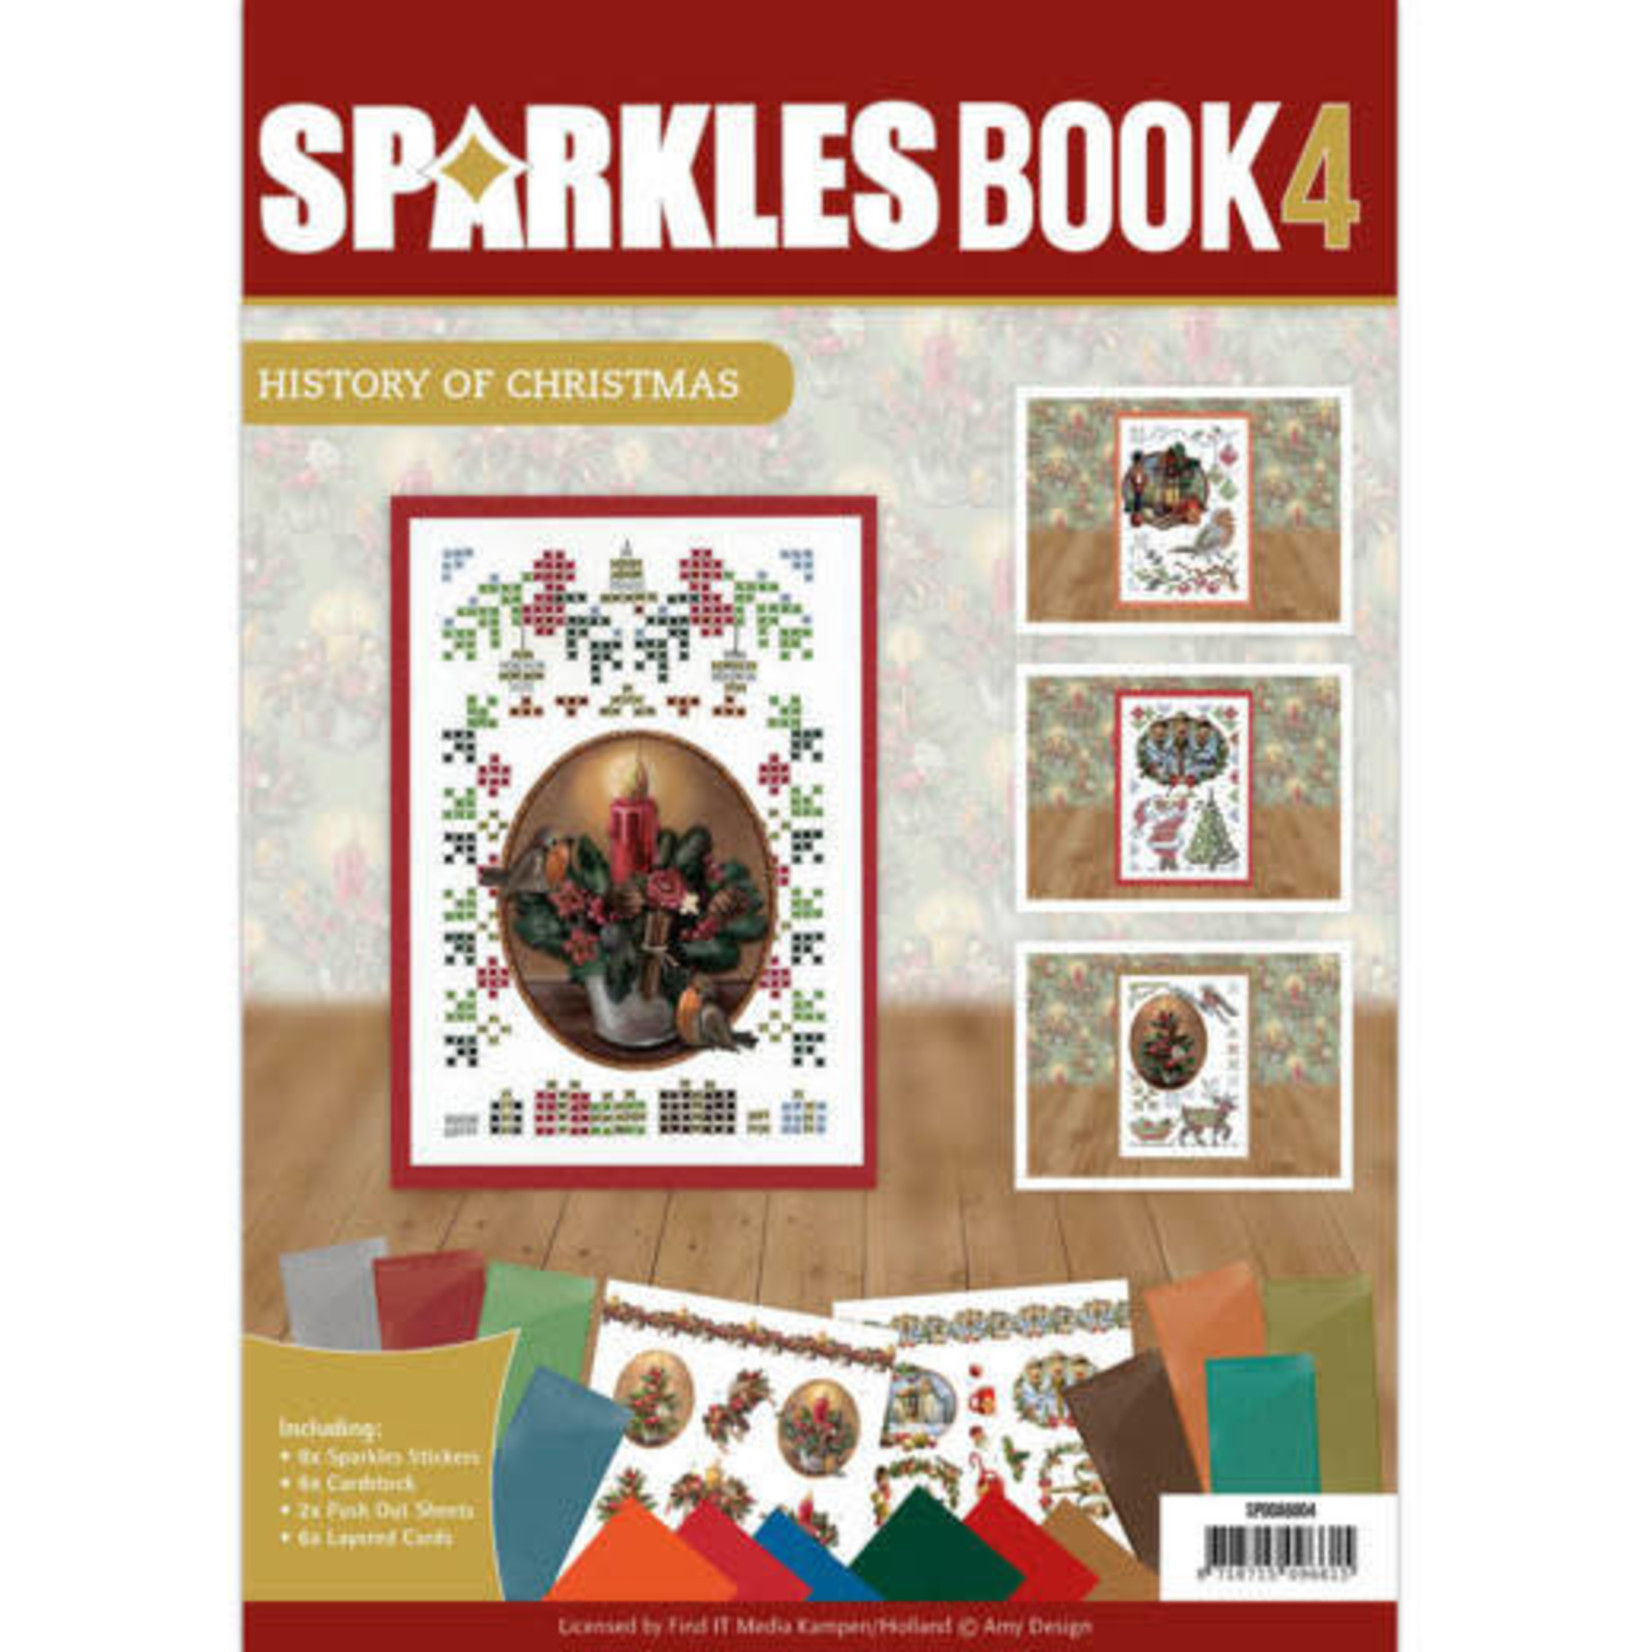 Find It Media Sparkle Book A6 - 4 - Amy Design - History of Christmas